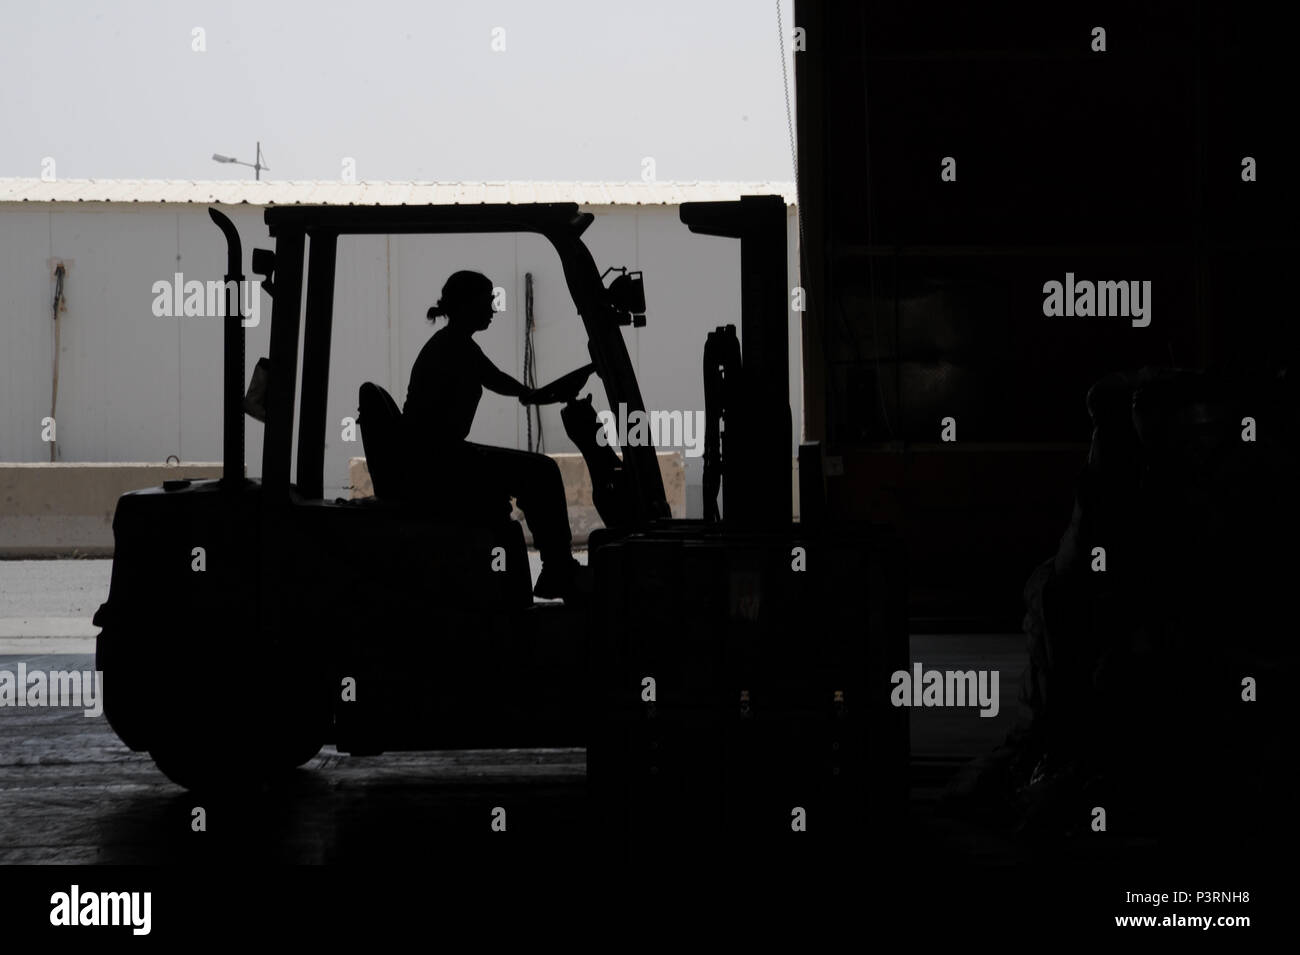 An Airman from the 386th Expeditionary Logistics Readiness Squadron aerial port flight operates a forklift July 21, 2016 at an undisclosed location in Southwest Asia. The 386 ELRS is home to the busiest aerial port in Southwest Asia. (U.S. Air Force photo/Senior Airman Zachary Kee) Stock Photo